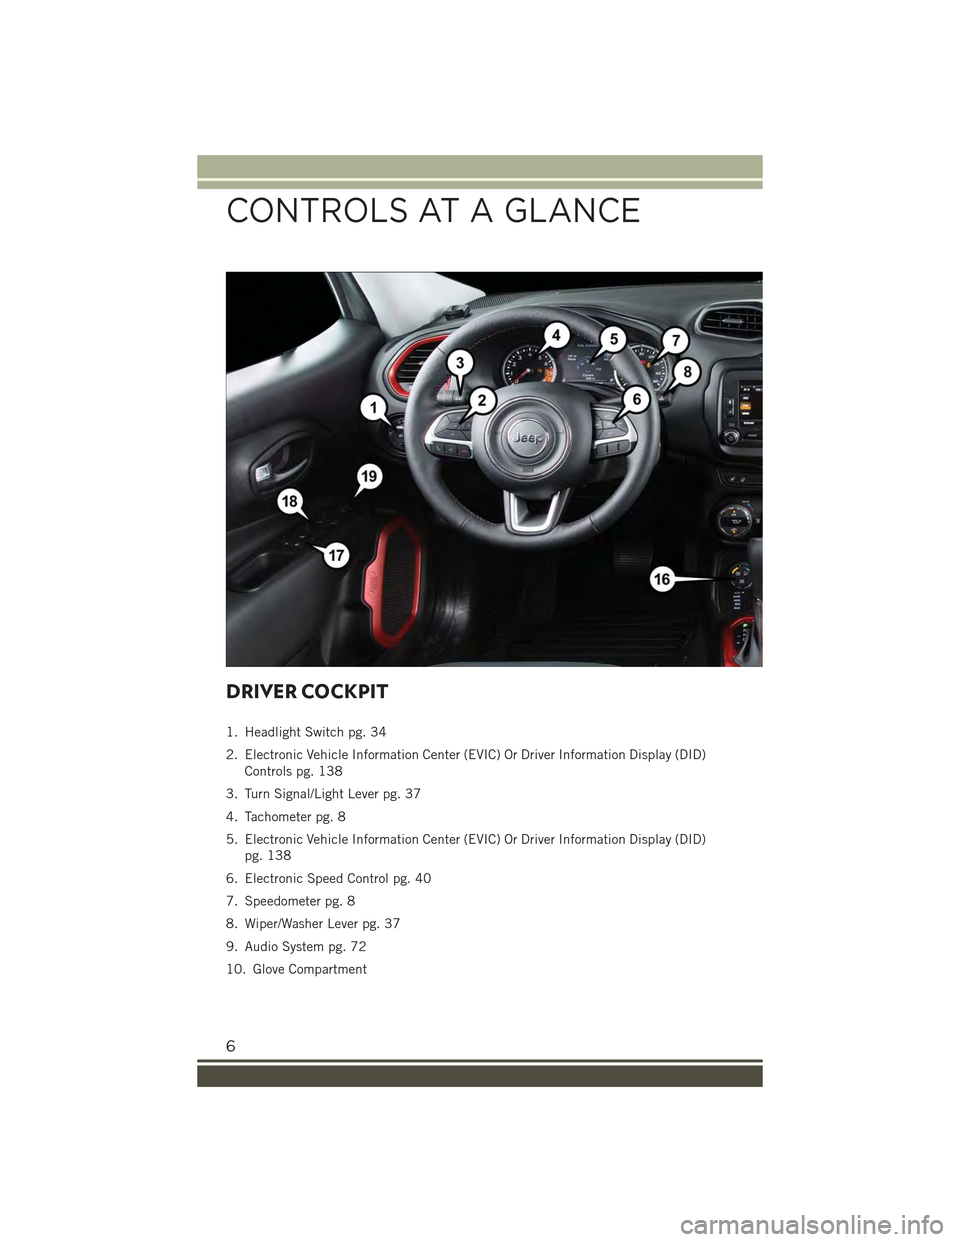 JEEP RENEGADE 2015 1.G User Guide DRIVER COCKPIT
1. Headlight Switch pg. 34
2. Electronic Vehicle Information Center (EVIC) Or Driver Information Display (DID)
Controls pg. 138
3. Turn Signal/Light Lever pg. 37
4. Tachometer pg. 8
5. 